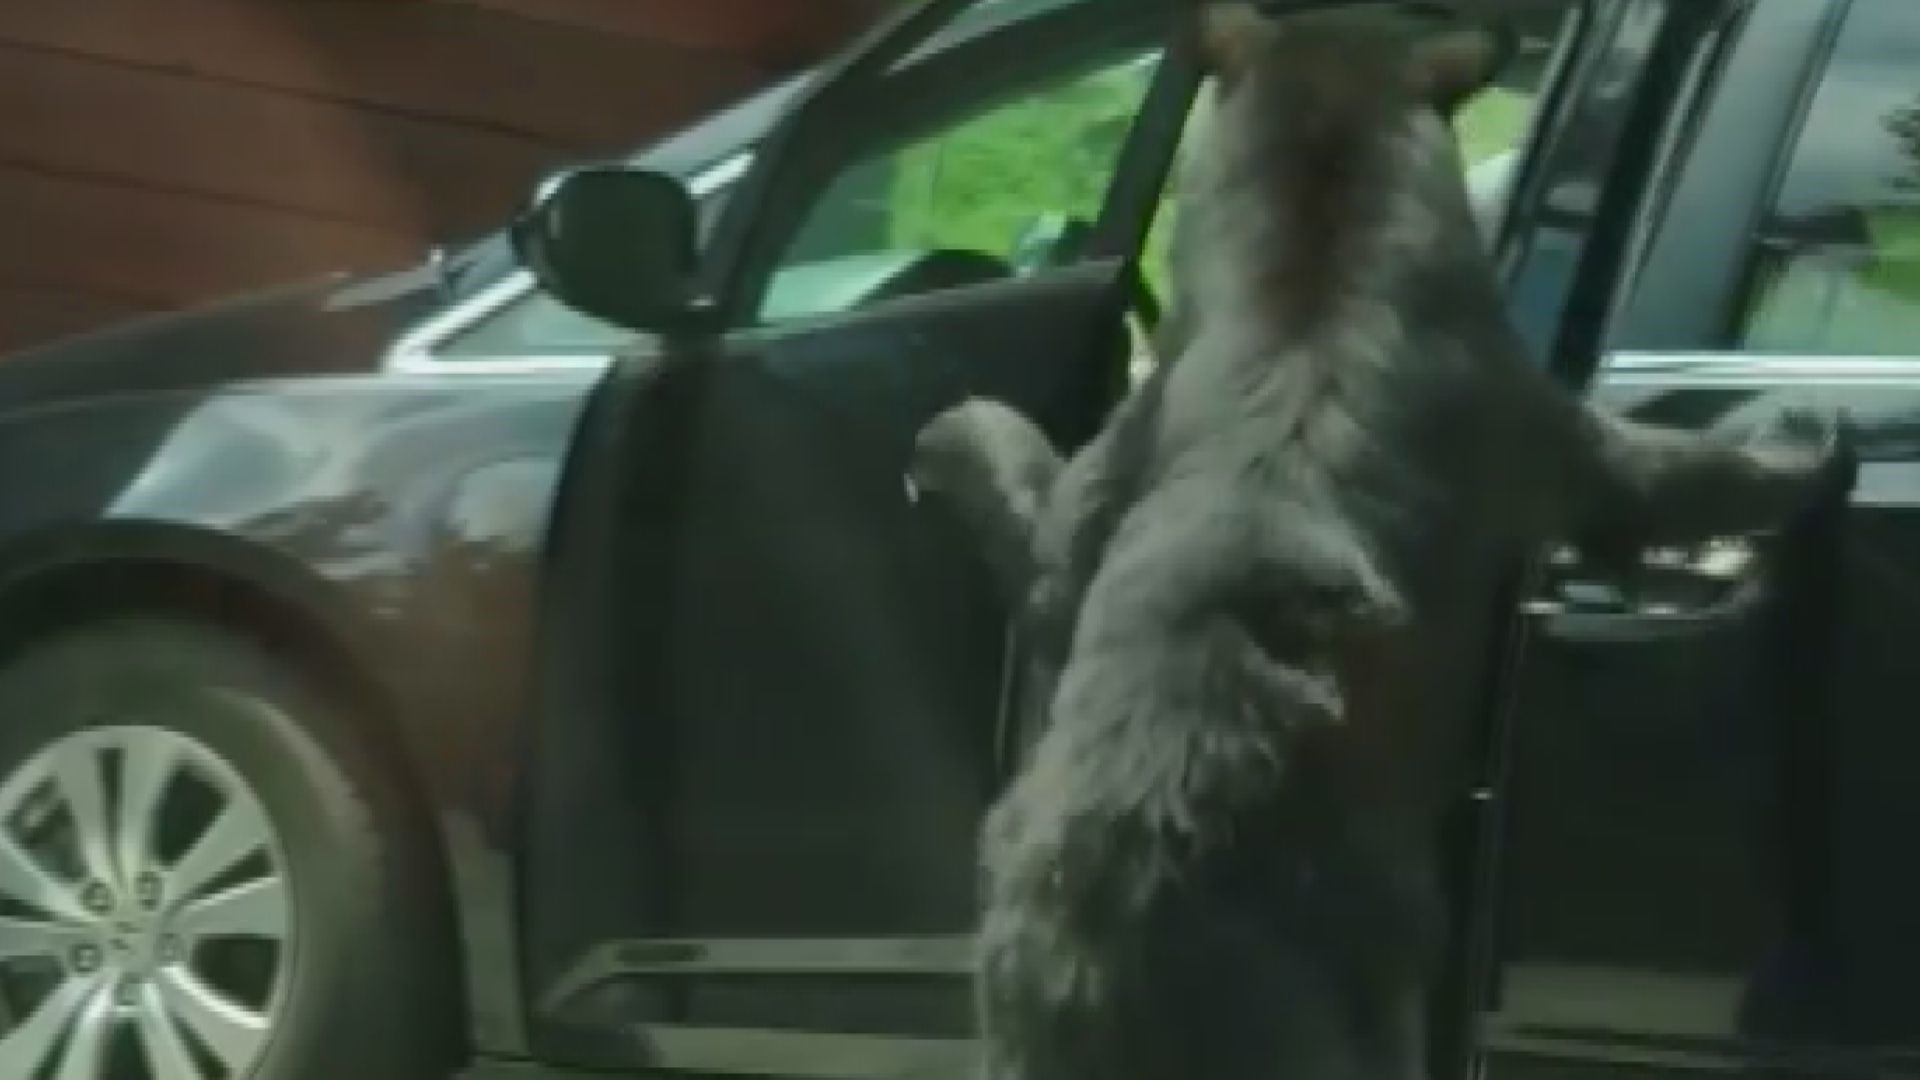 A closed door was no obstacle for a curious bear in Gatlinburg! Video from Diana Sosa.